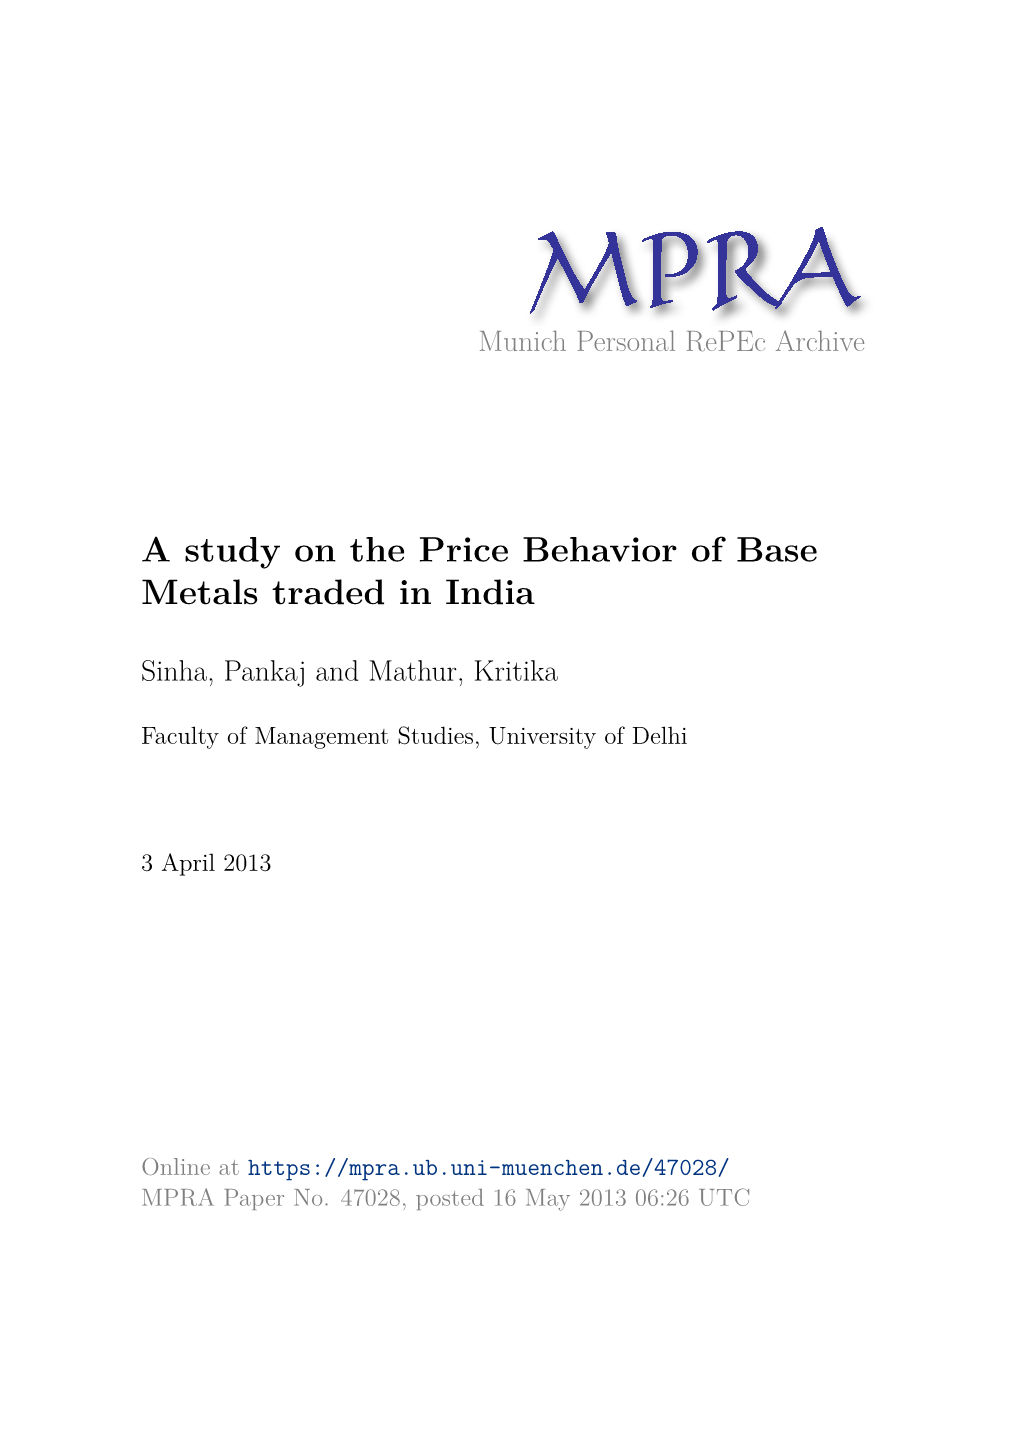 A Study on the Price Behavior of Base Metals Traded in India